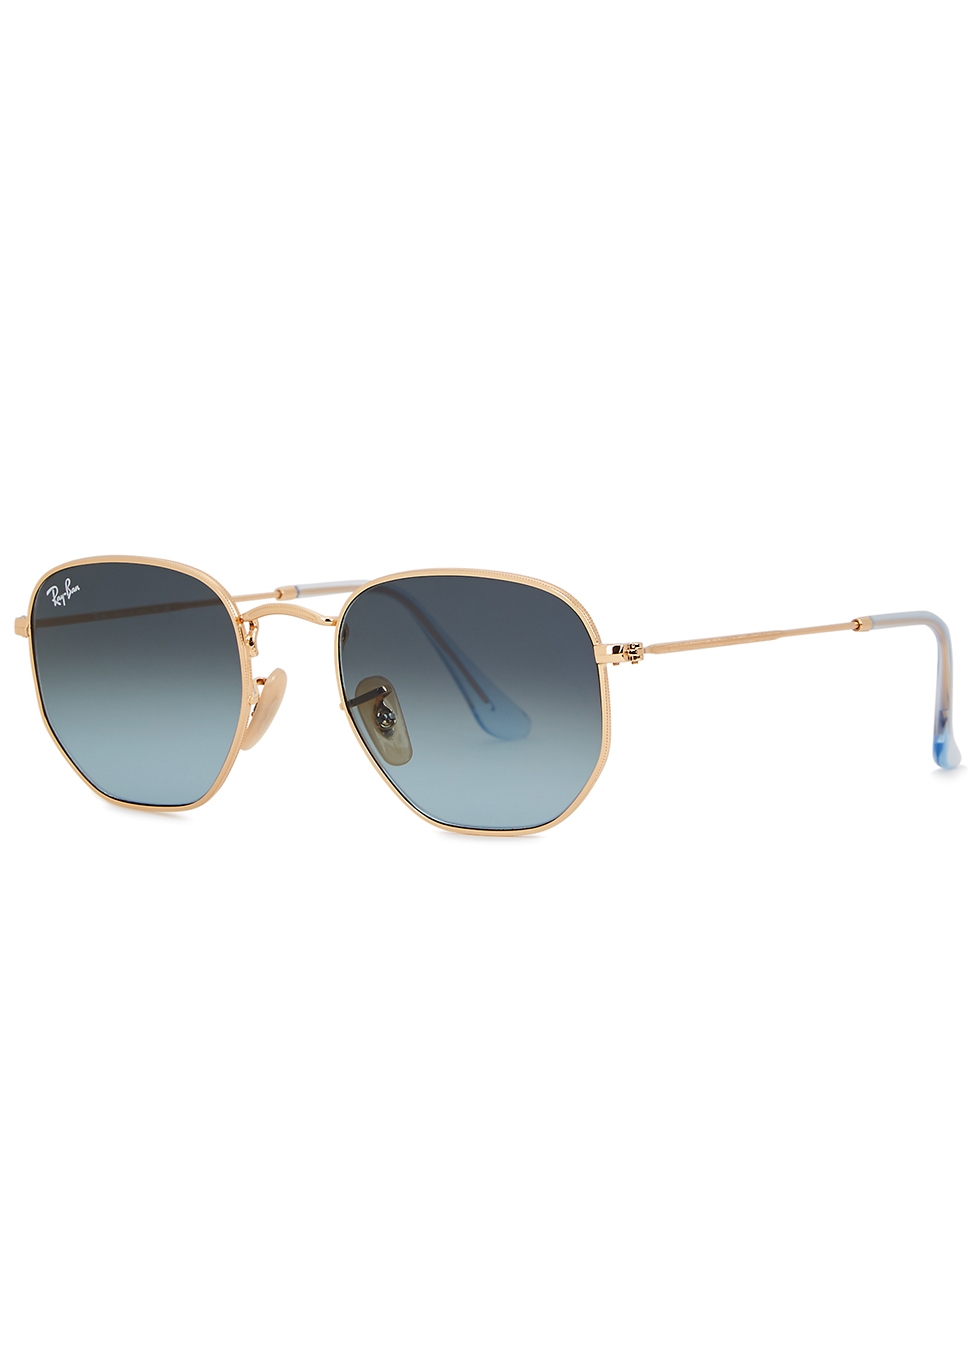 ray ban gold rimmed glasses